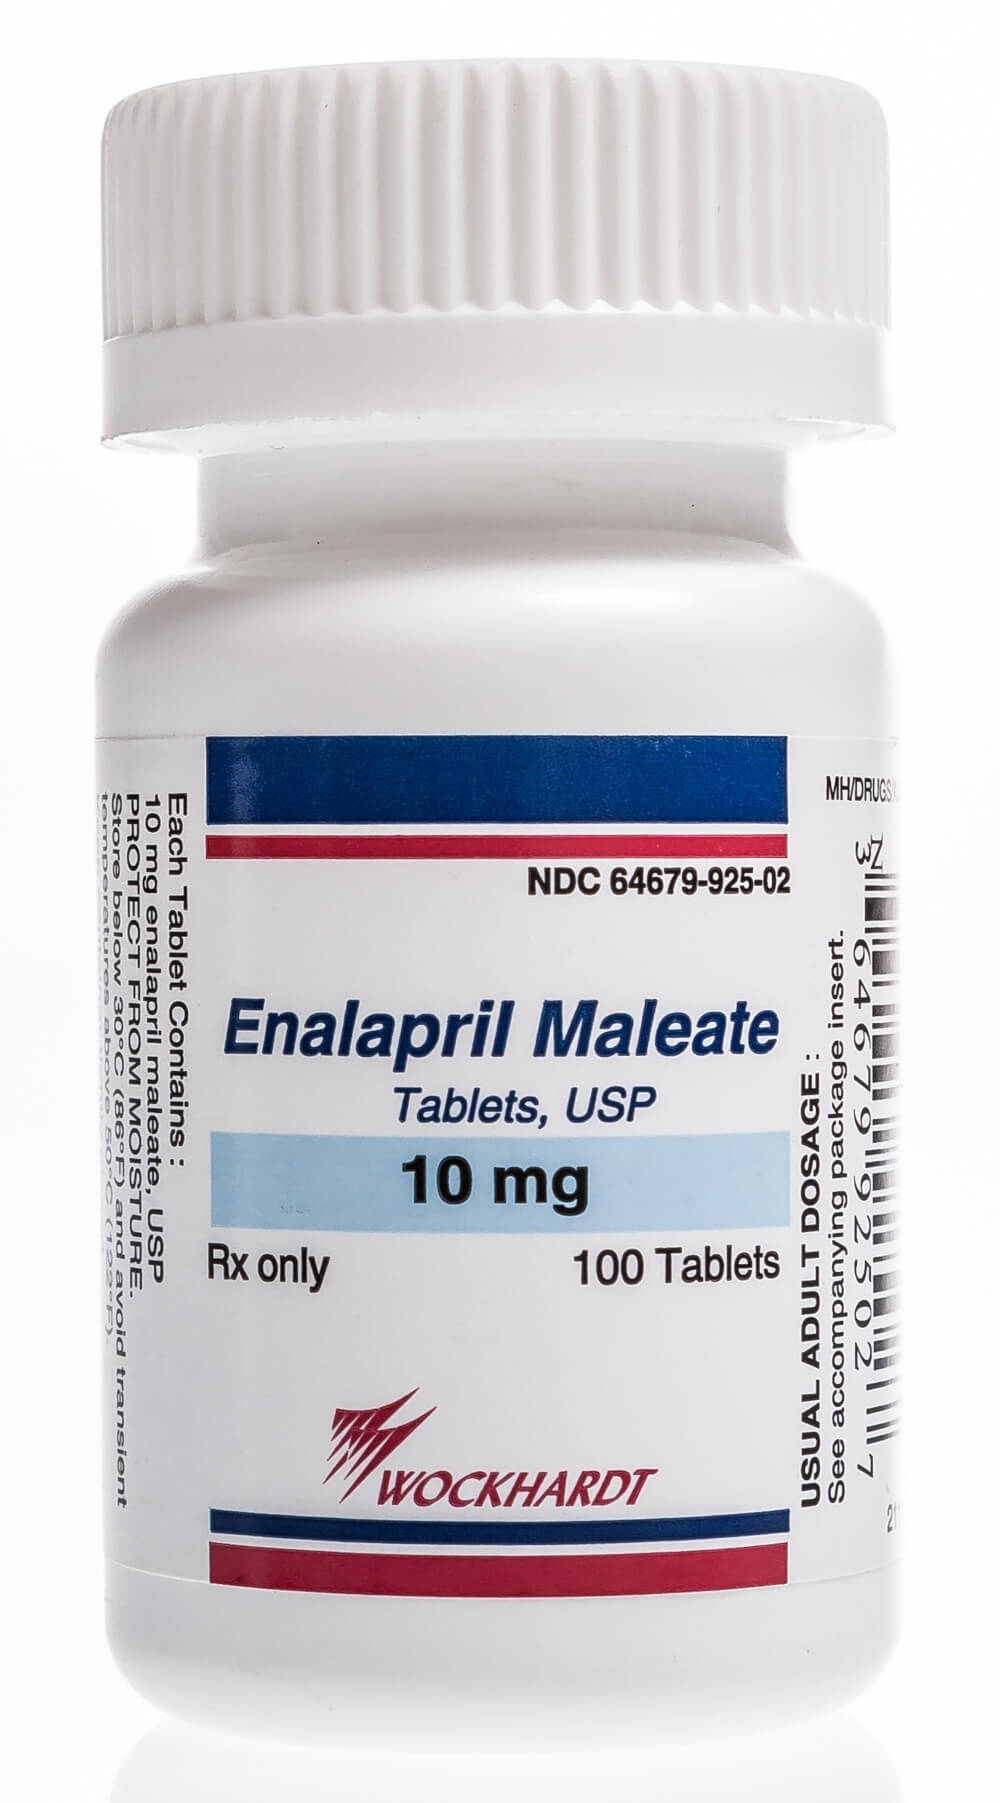 what is enalapril maleate prescription drugs used for